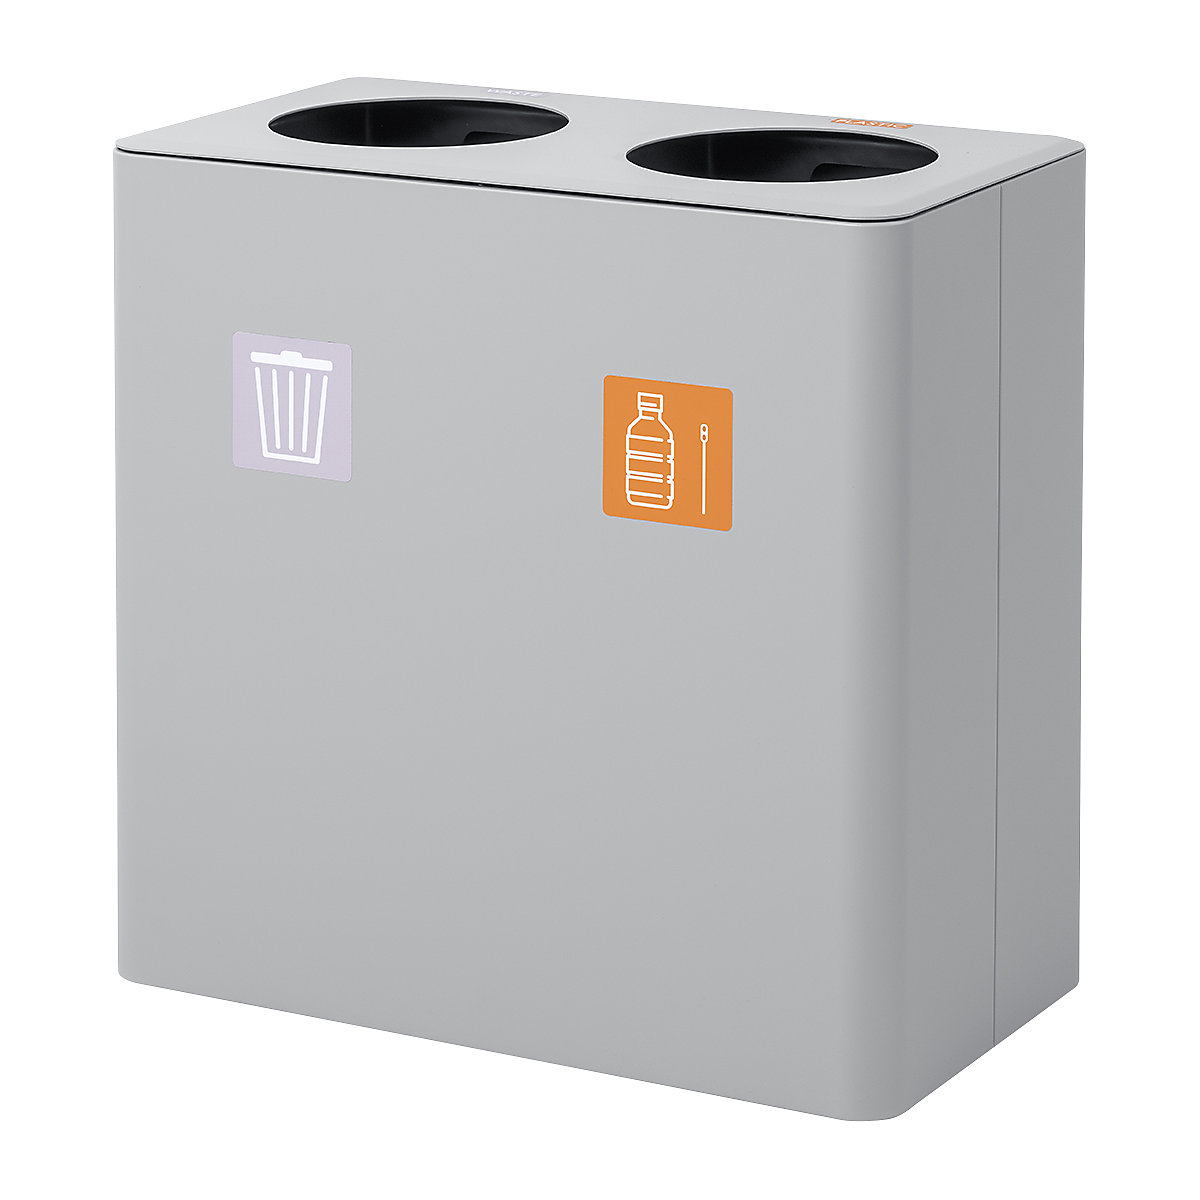 Recyclable waste collector